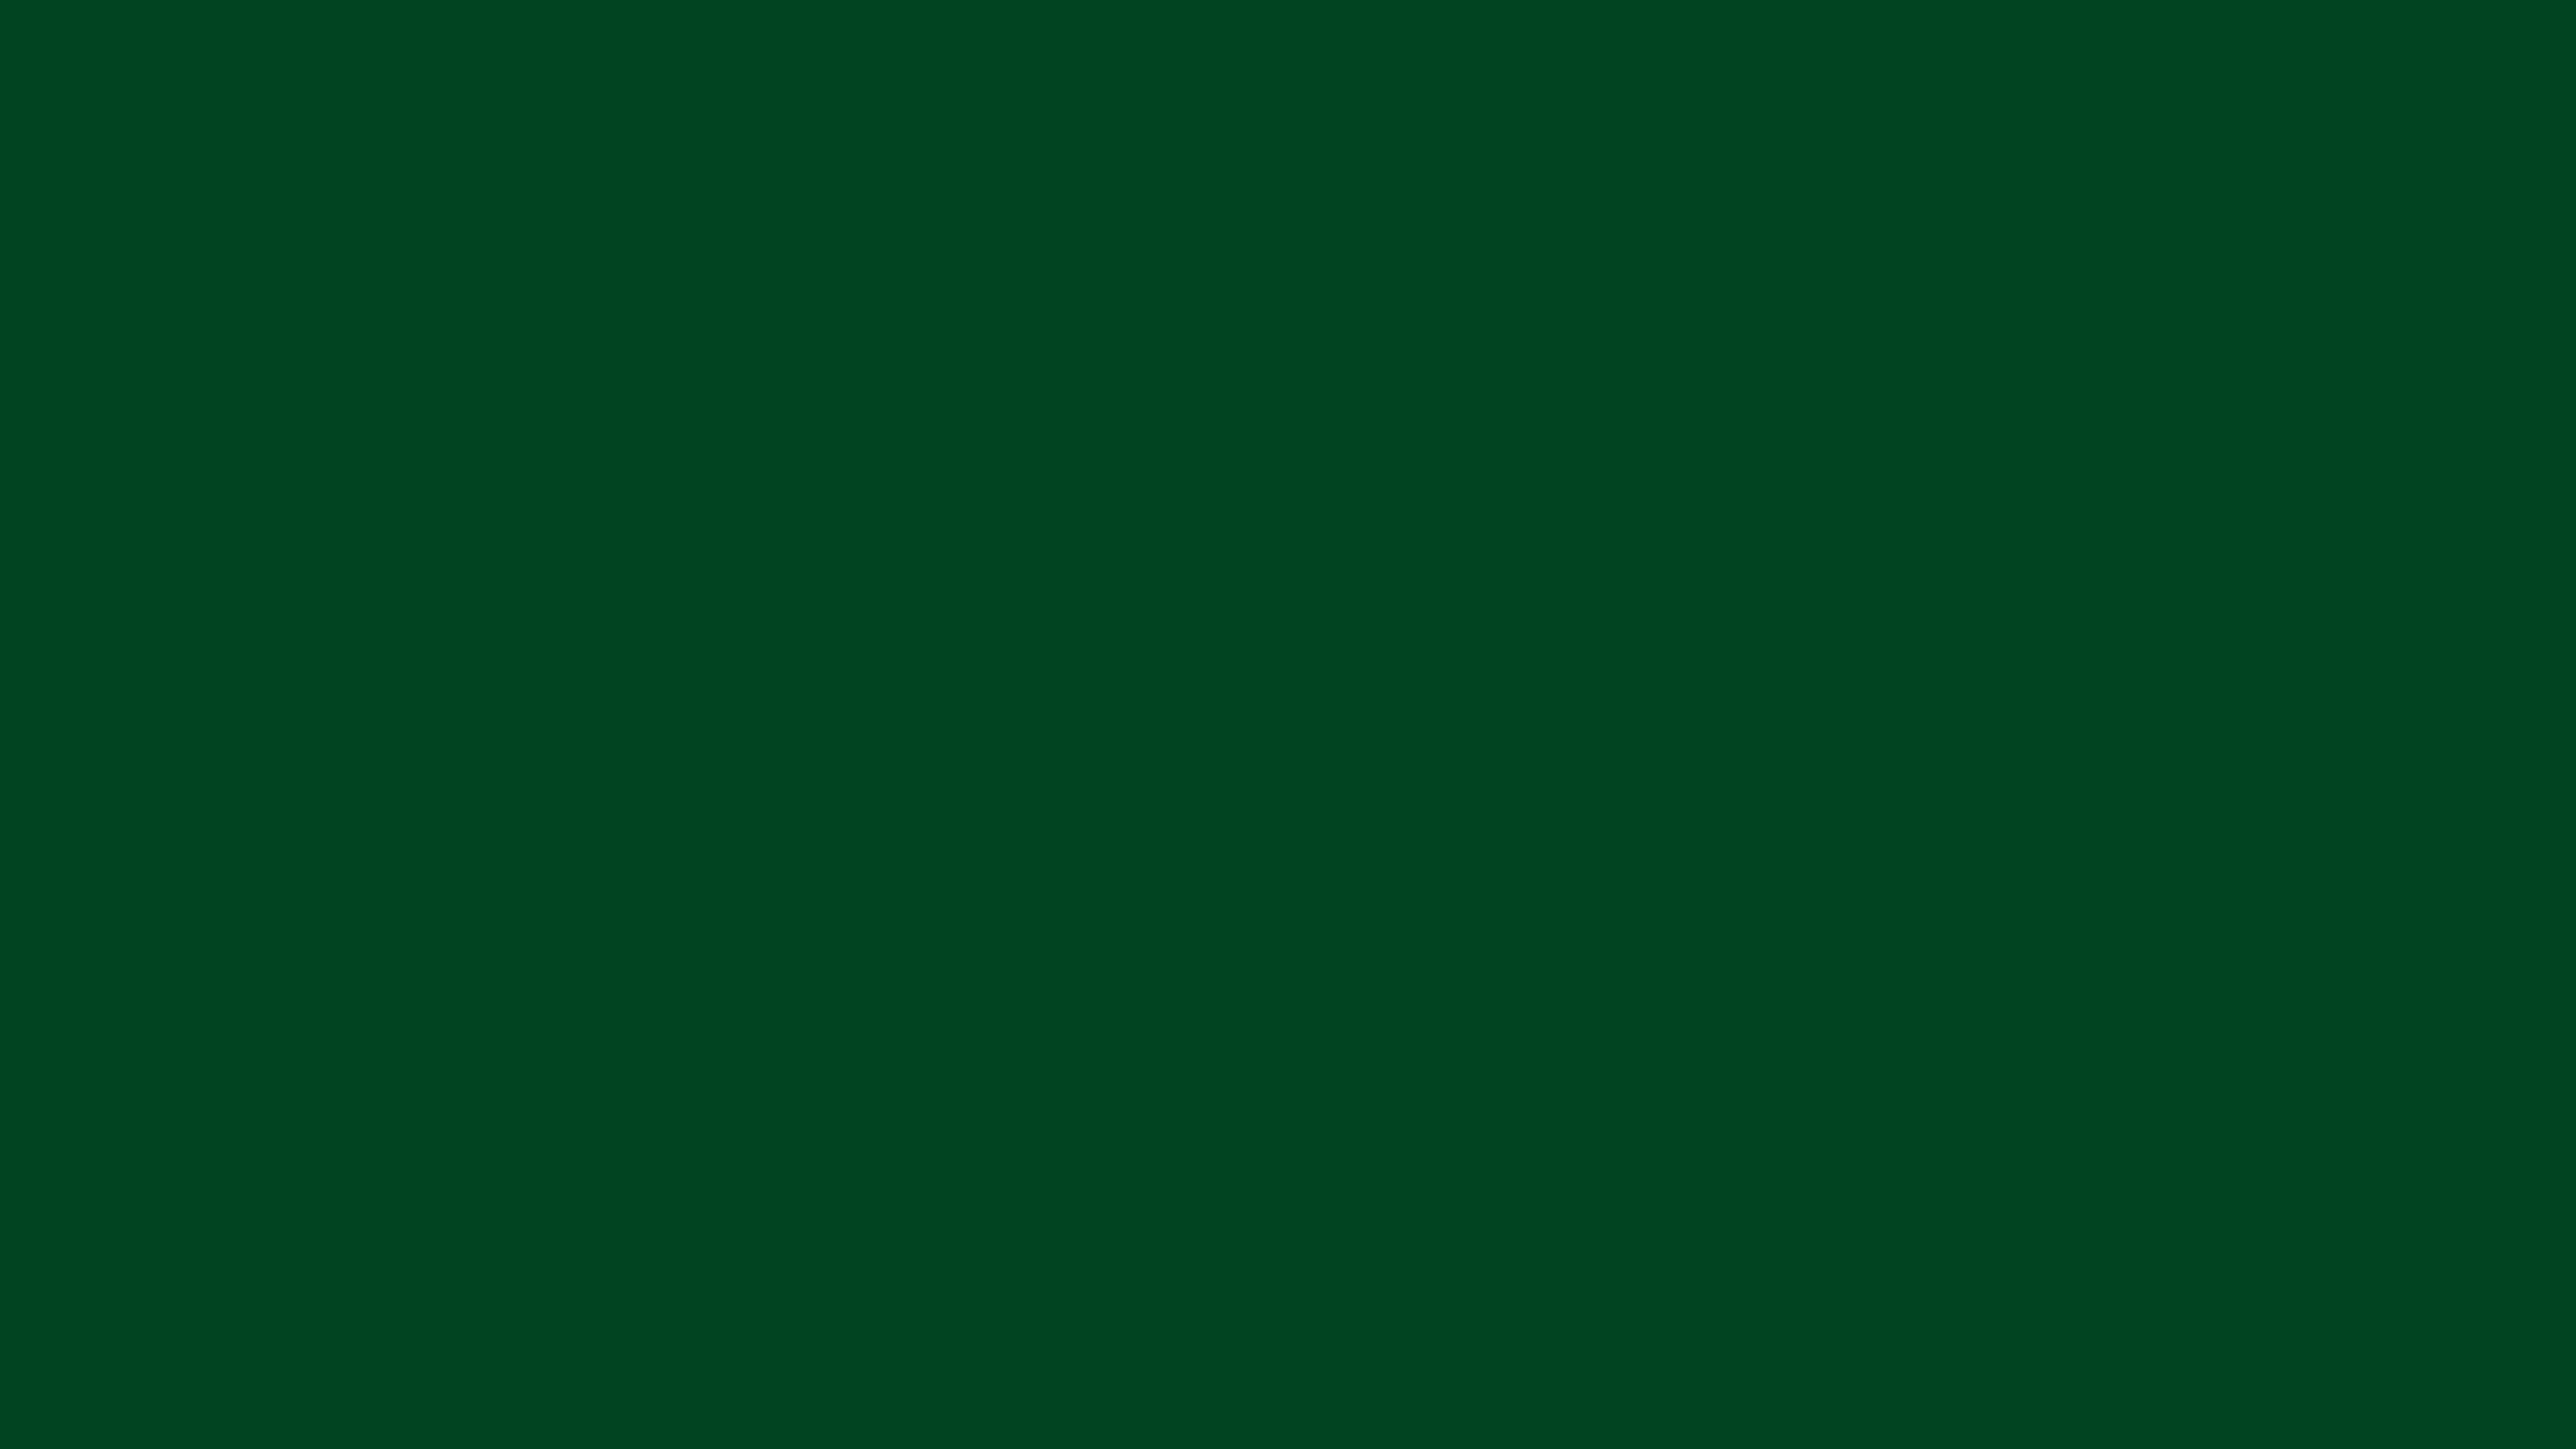 3840x2160 UP Forest Green Solid Color Background